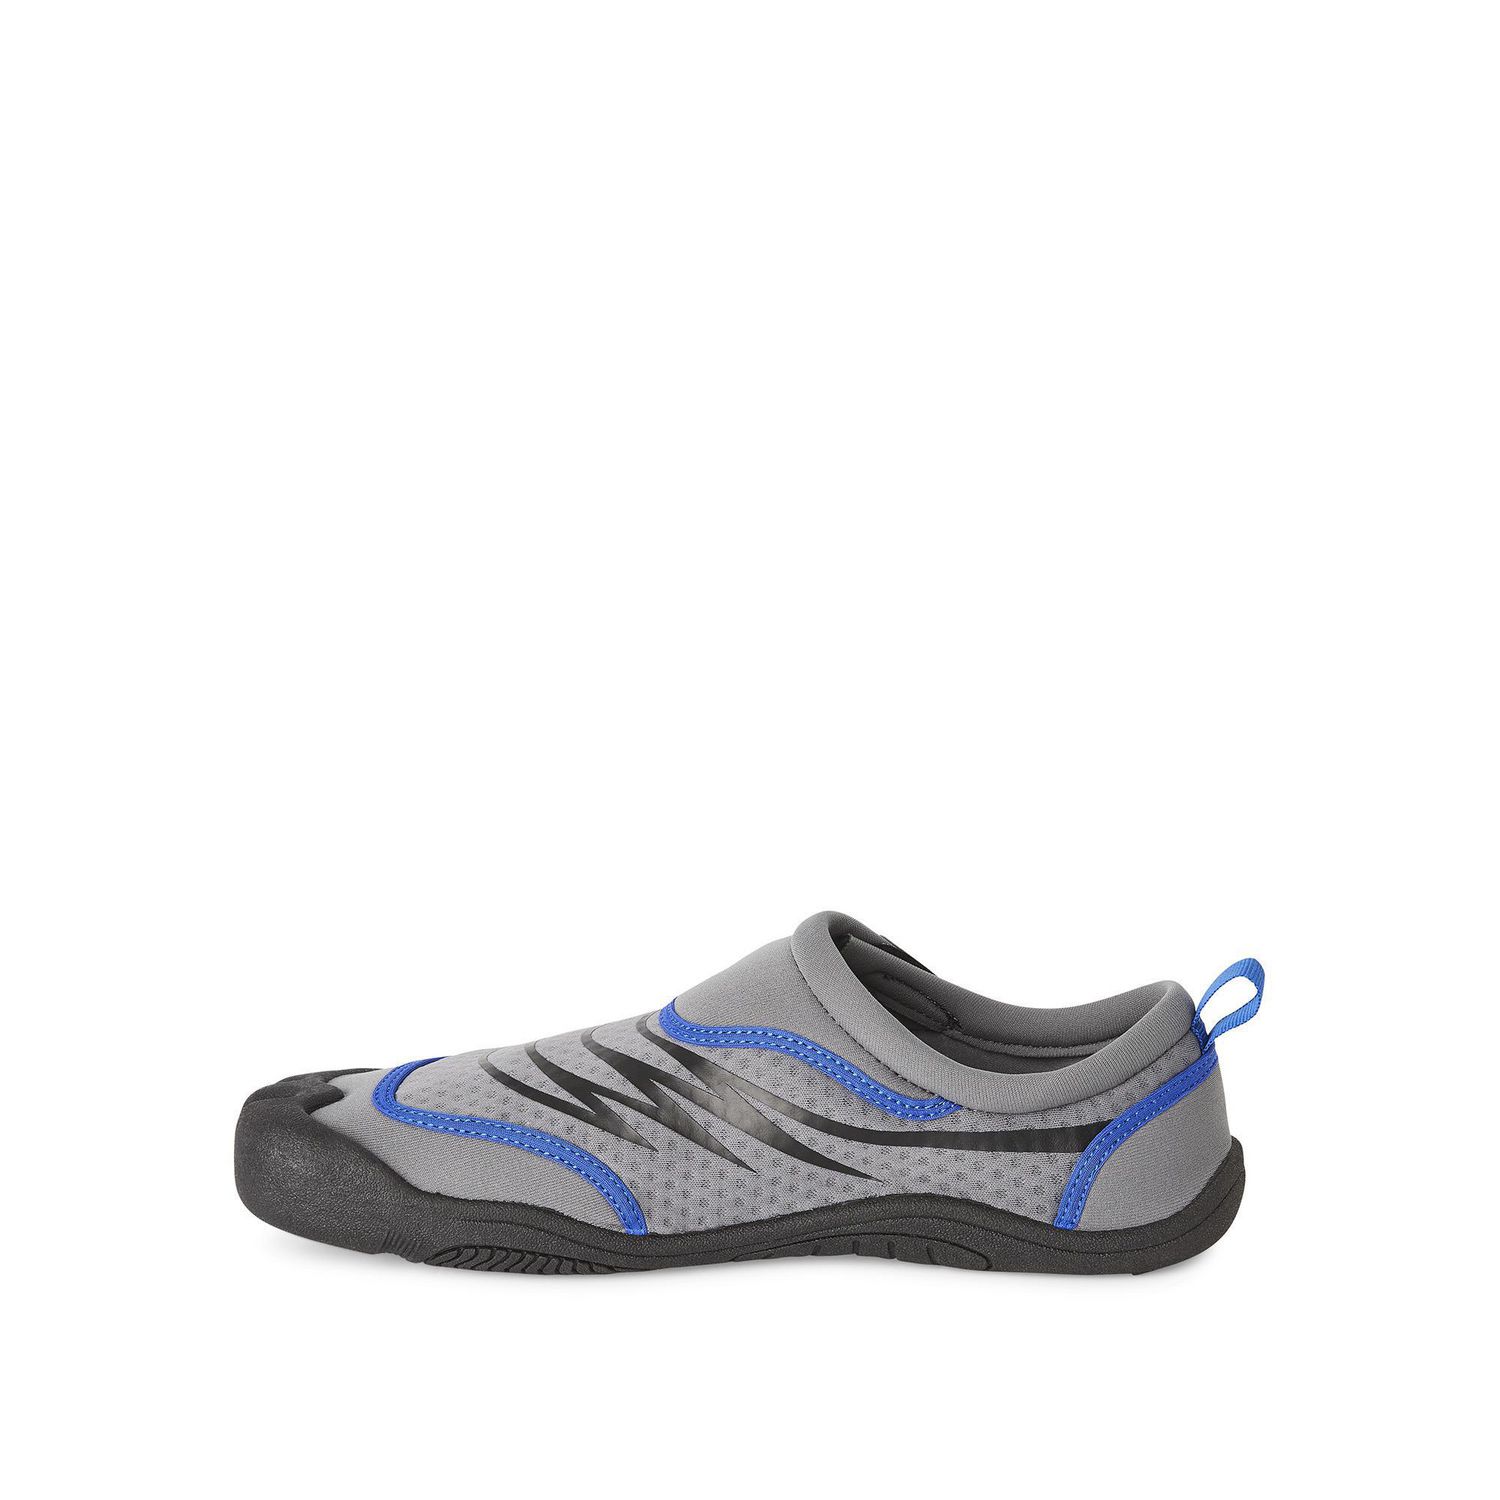 Athletic Works Men's Water Shoes, Sizes 7/8-11/12